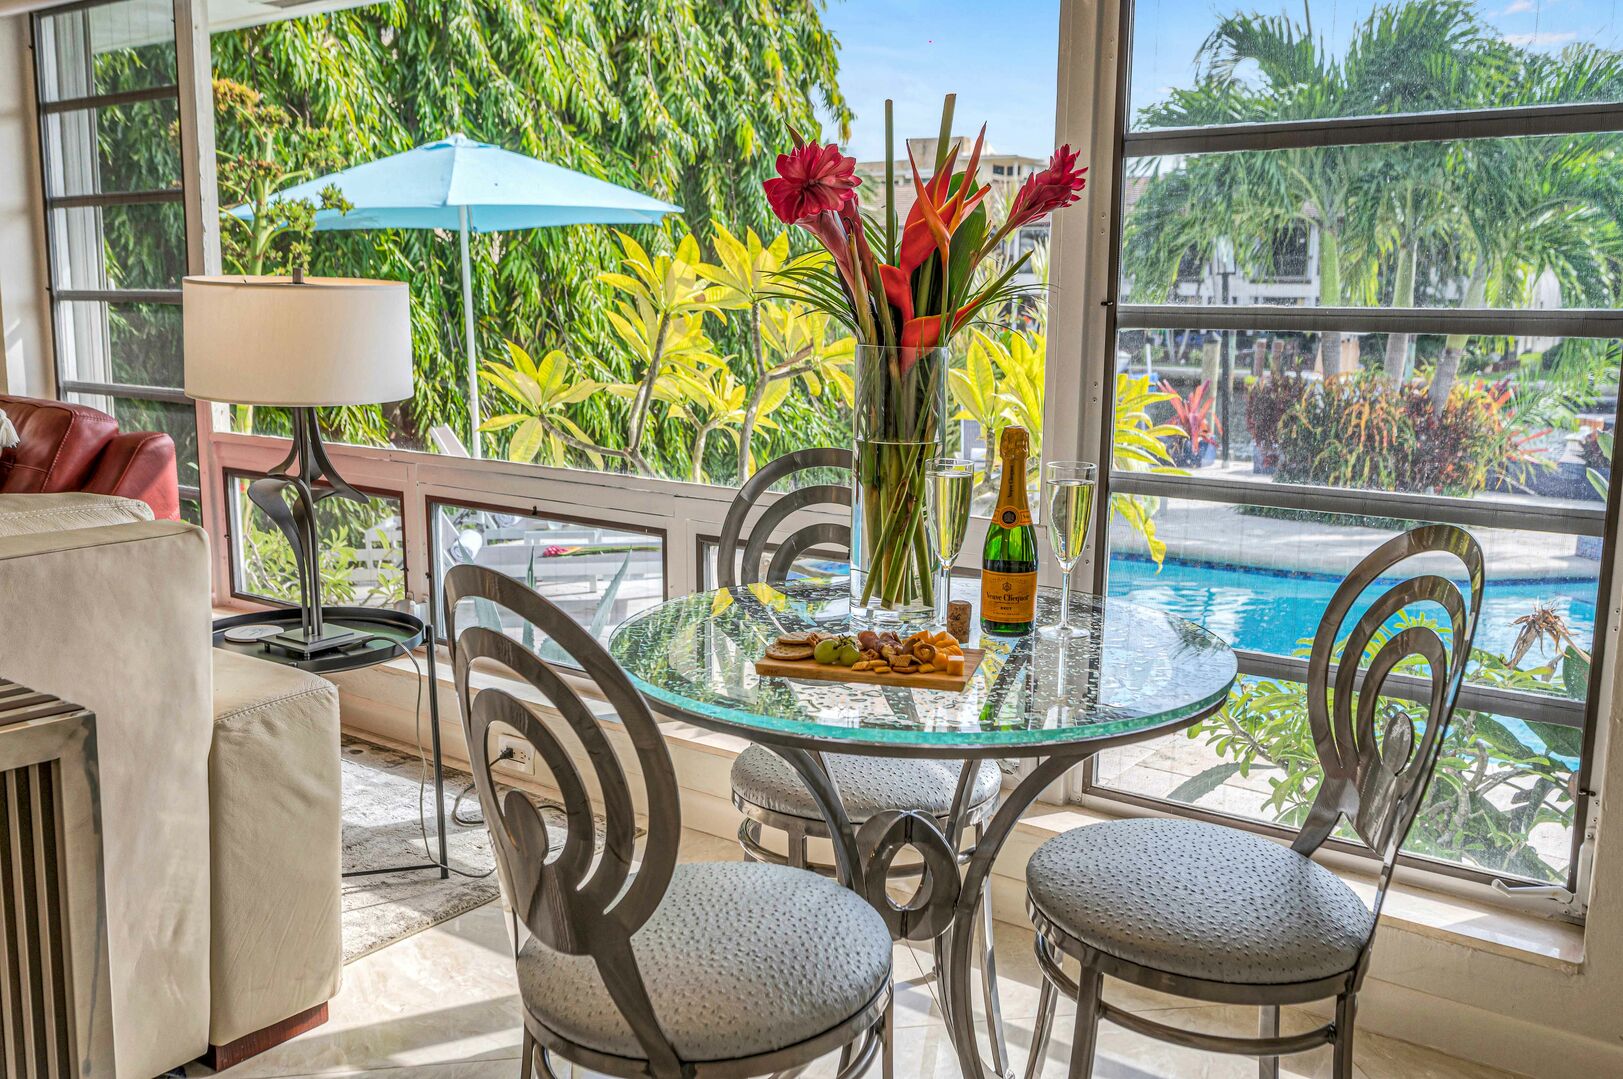 The dining table for 3 guests overlooks the pool.